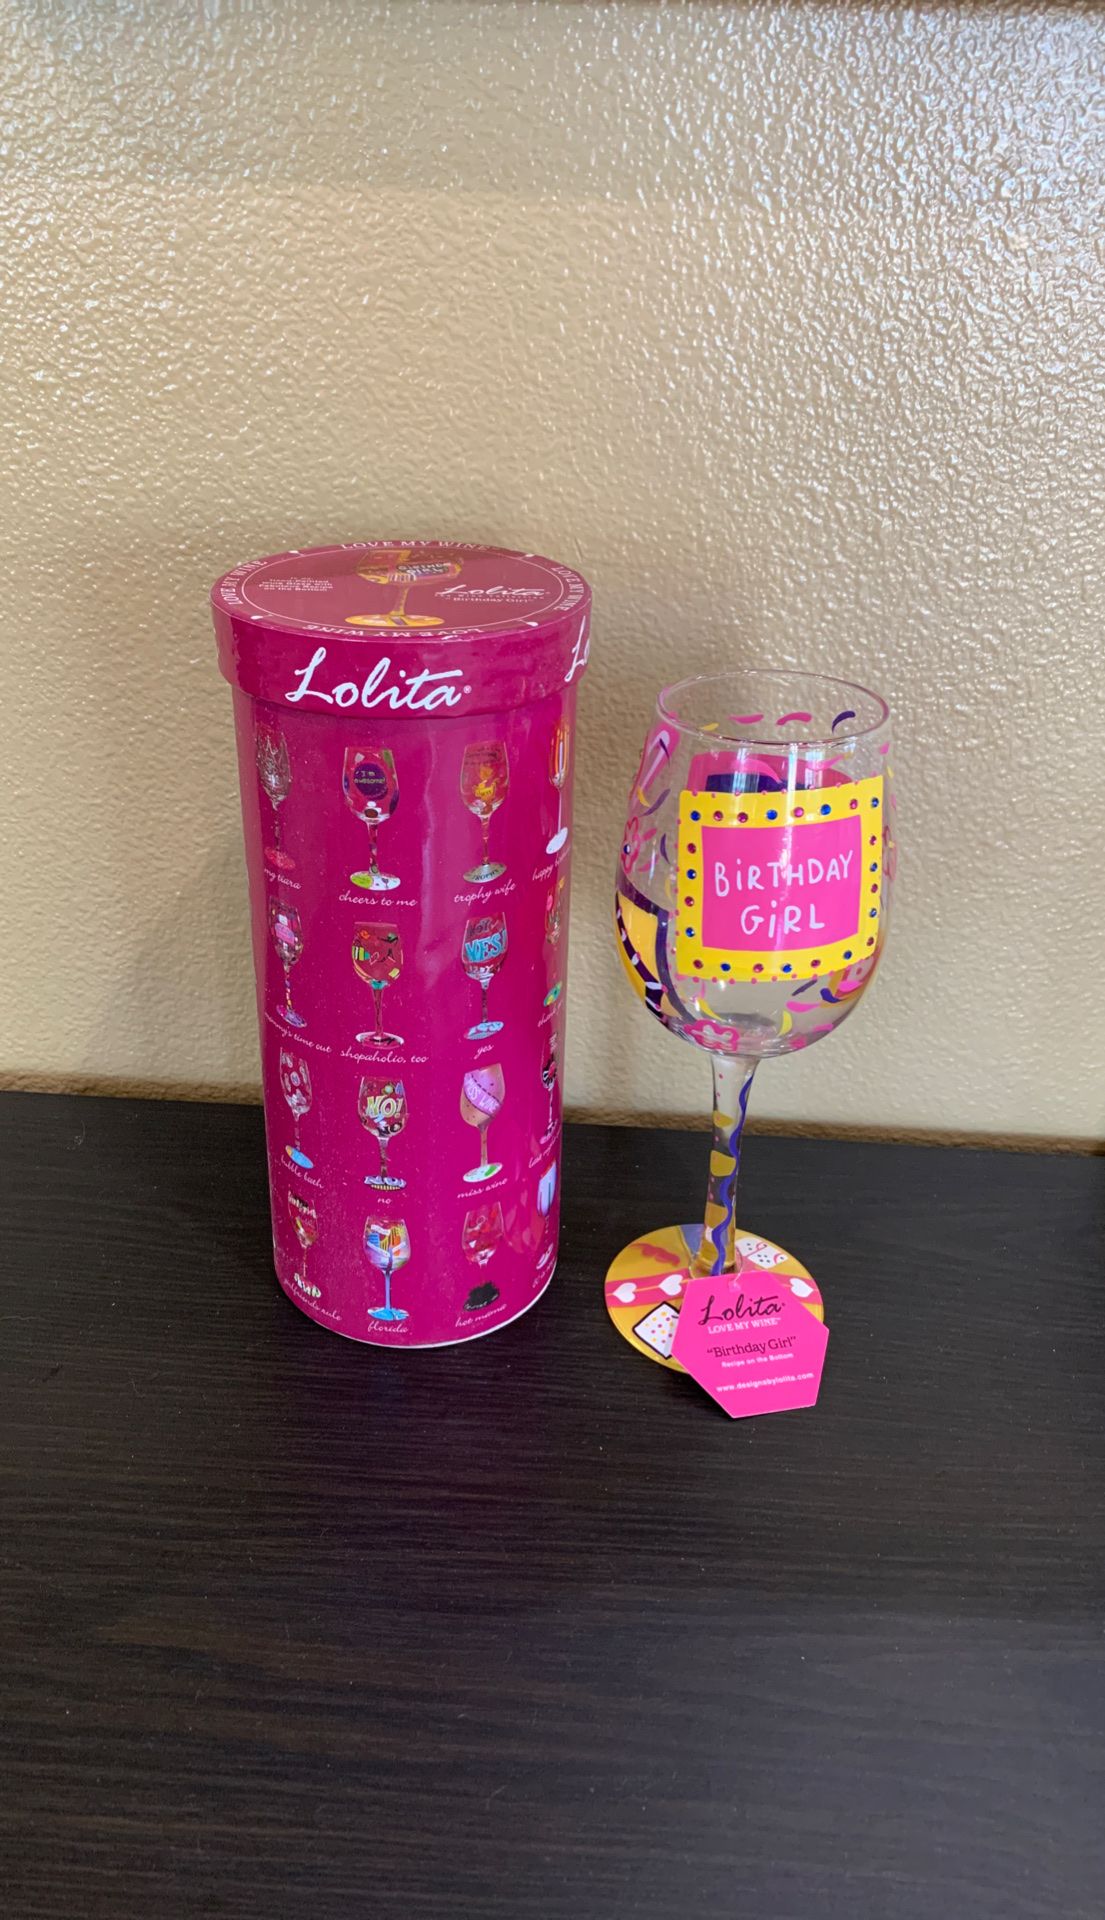 NEW! GREAT GIFT 🎁 LOLITA LOVE MY WINE “BIRTHDAY GIRL” 🎂 COLLECTIBLE WINE GLASS WITH RECIPE